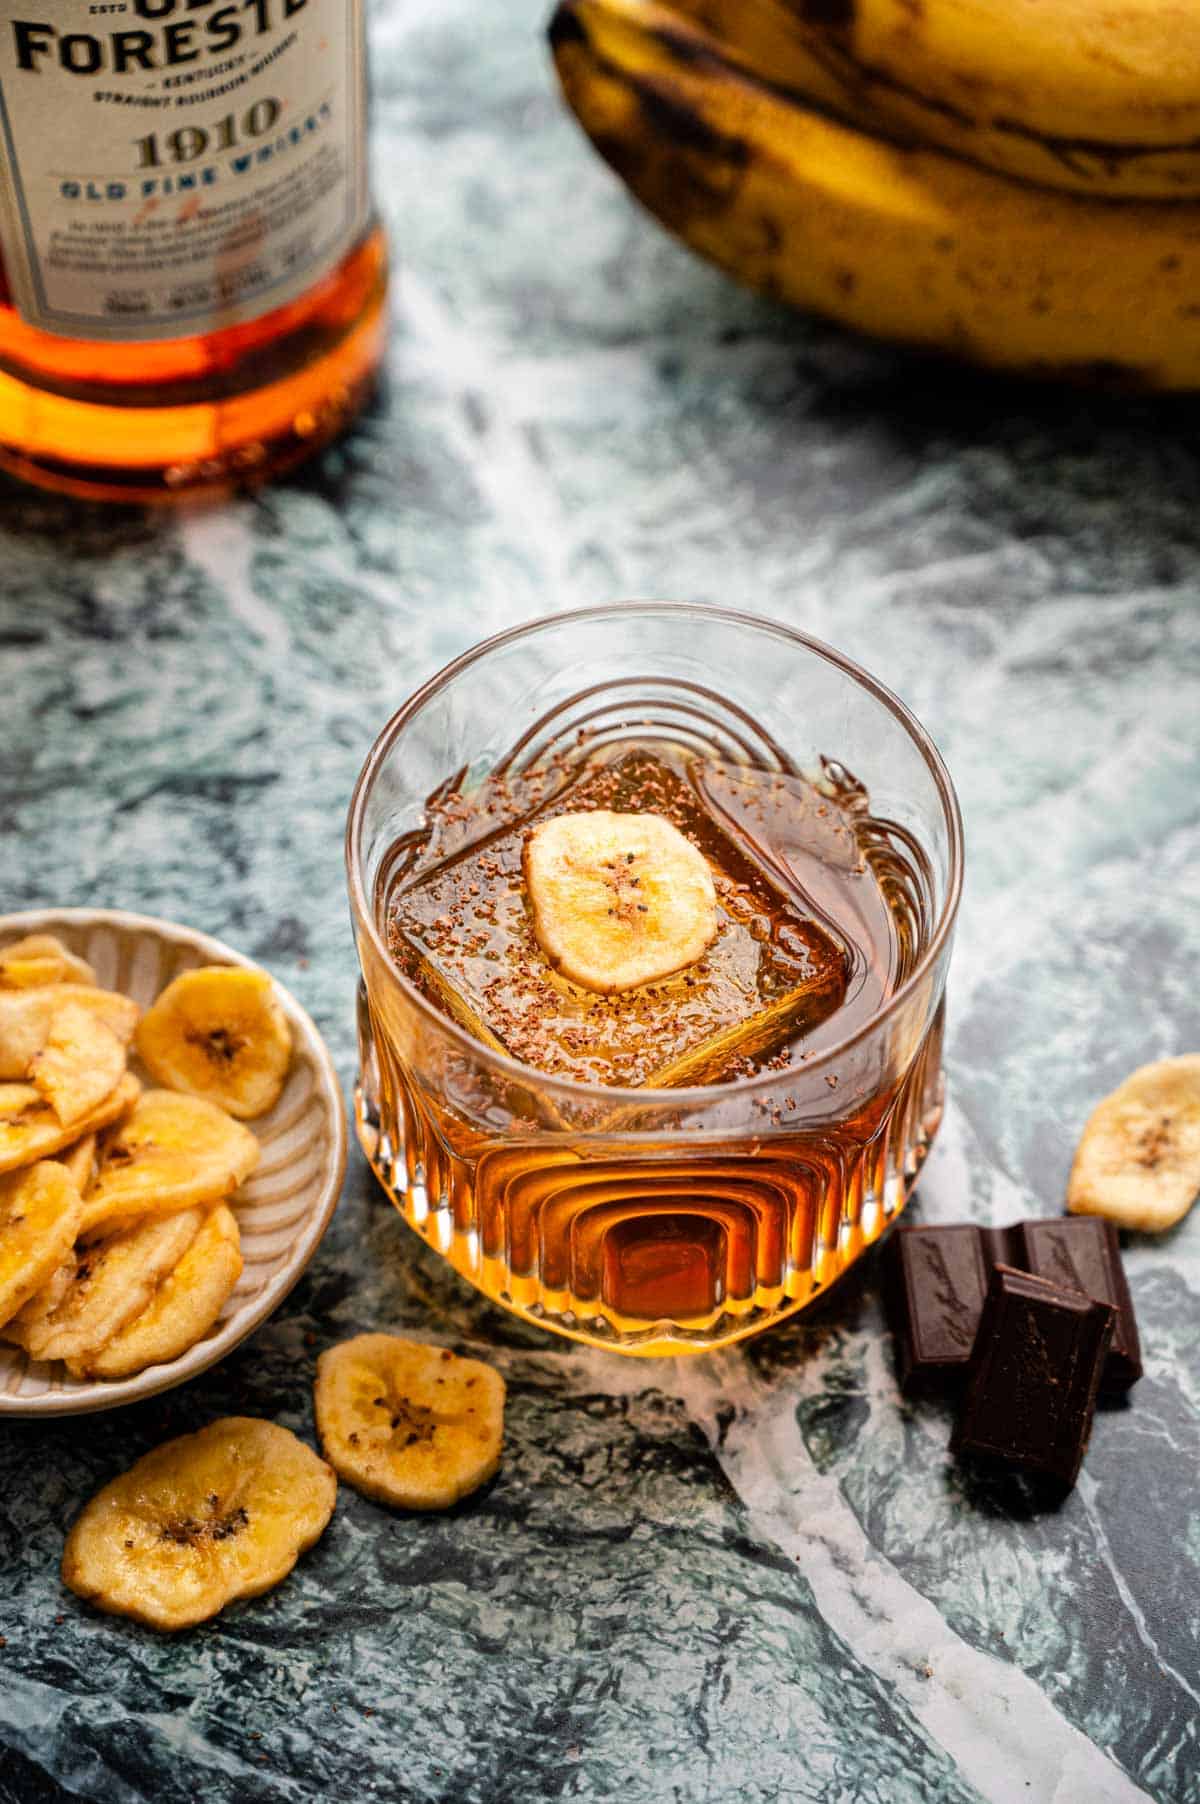 A rocks glass with a banana old fashioned  garnished with chocolate shavings and a banana chip, sitting on a green marble table.